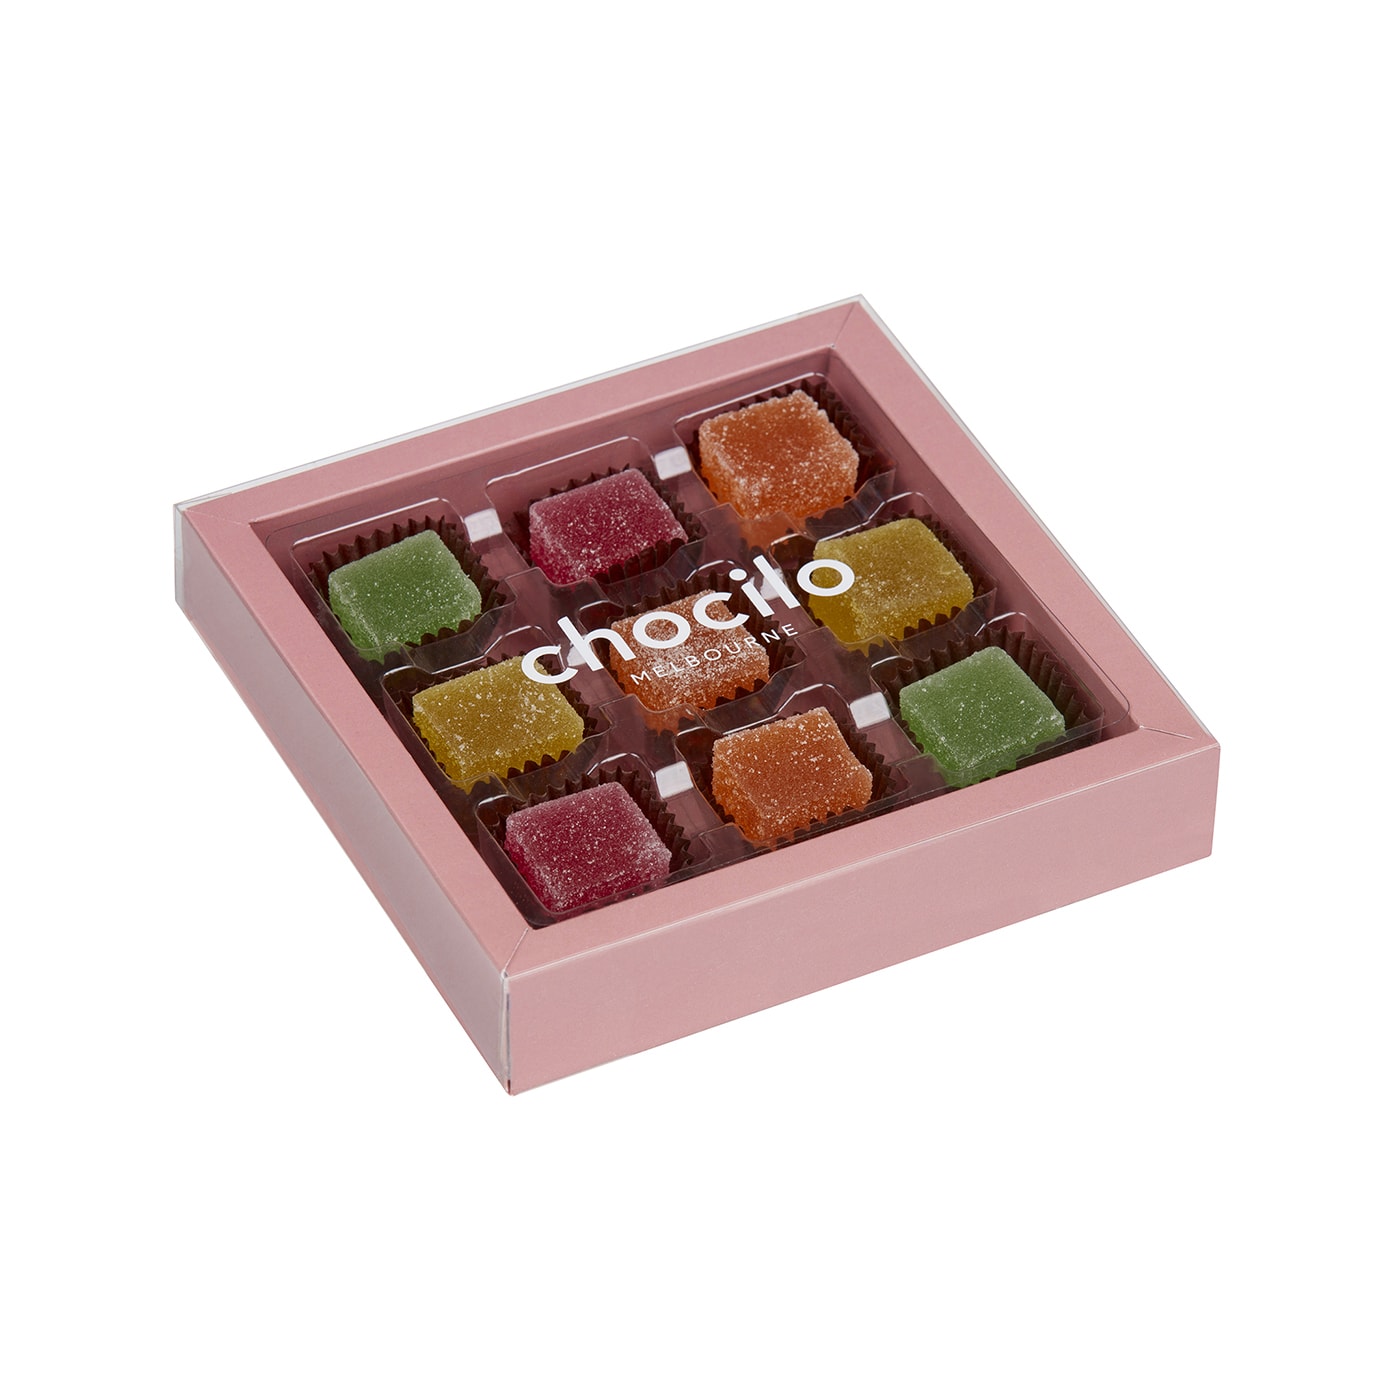 Chocilo Melbourne 90g 10 Pack Handmade Assorted Jellies Gift Box